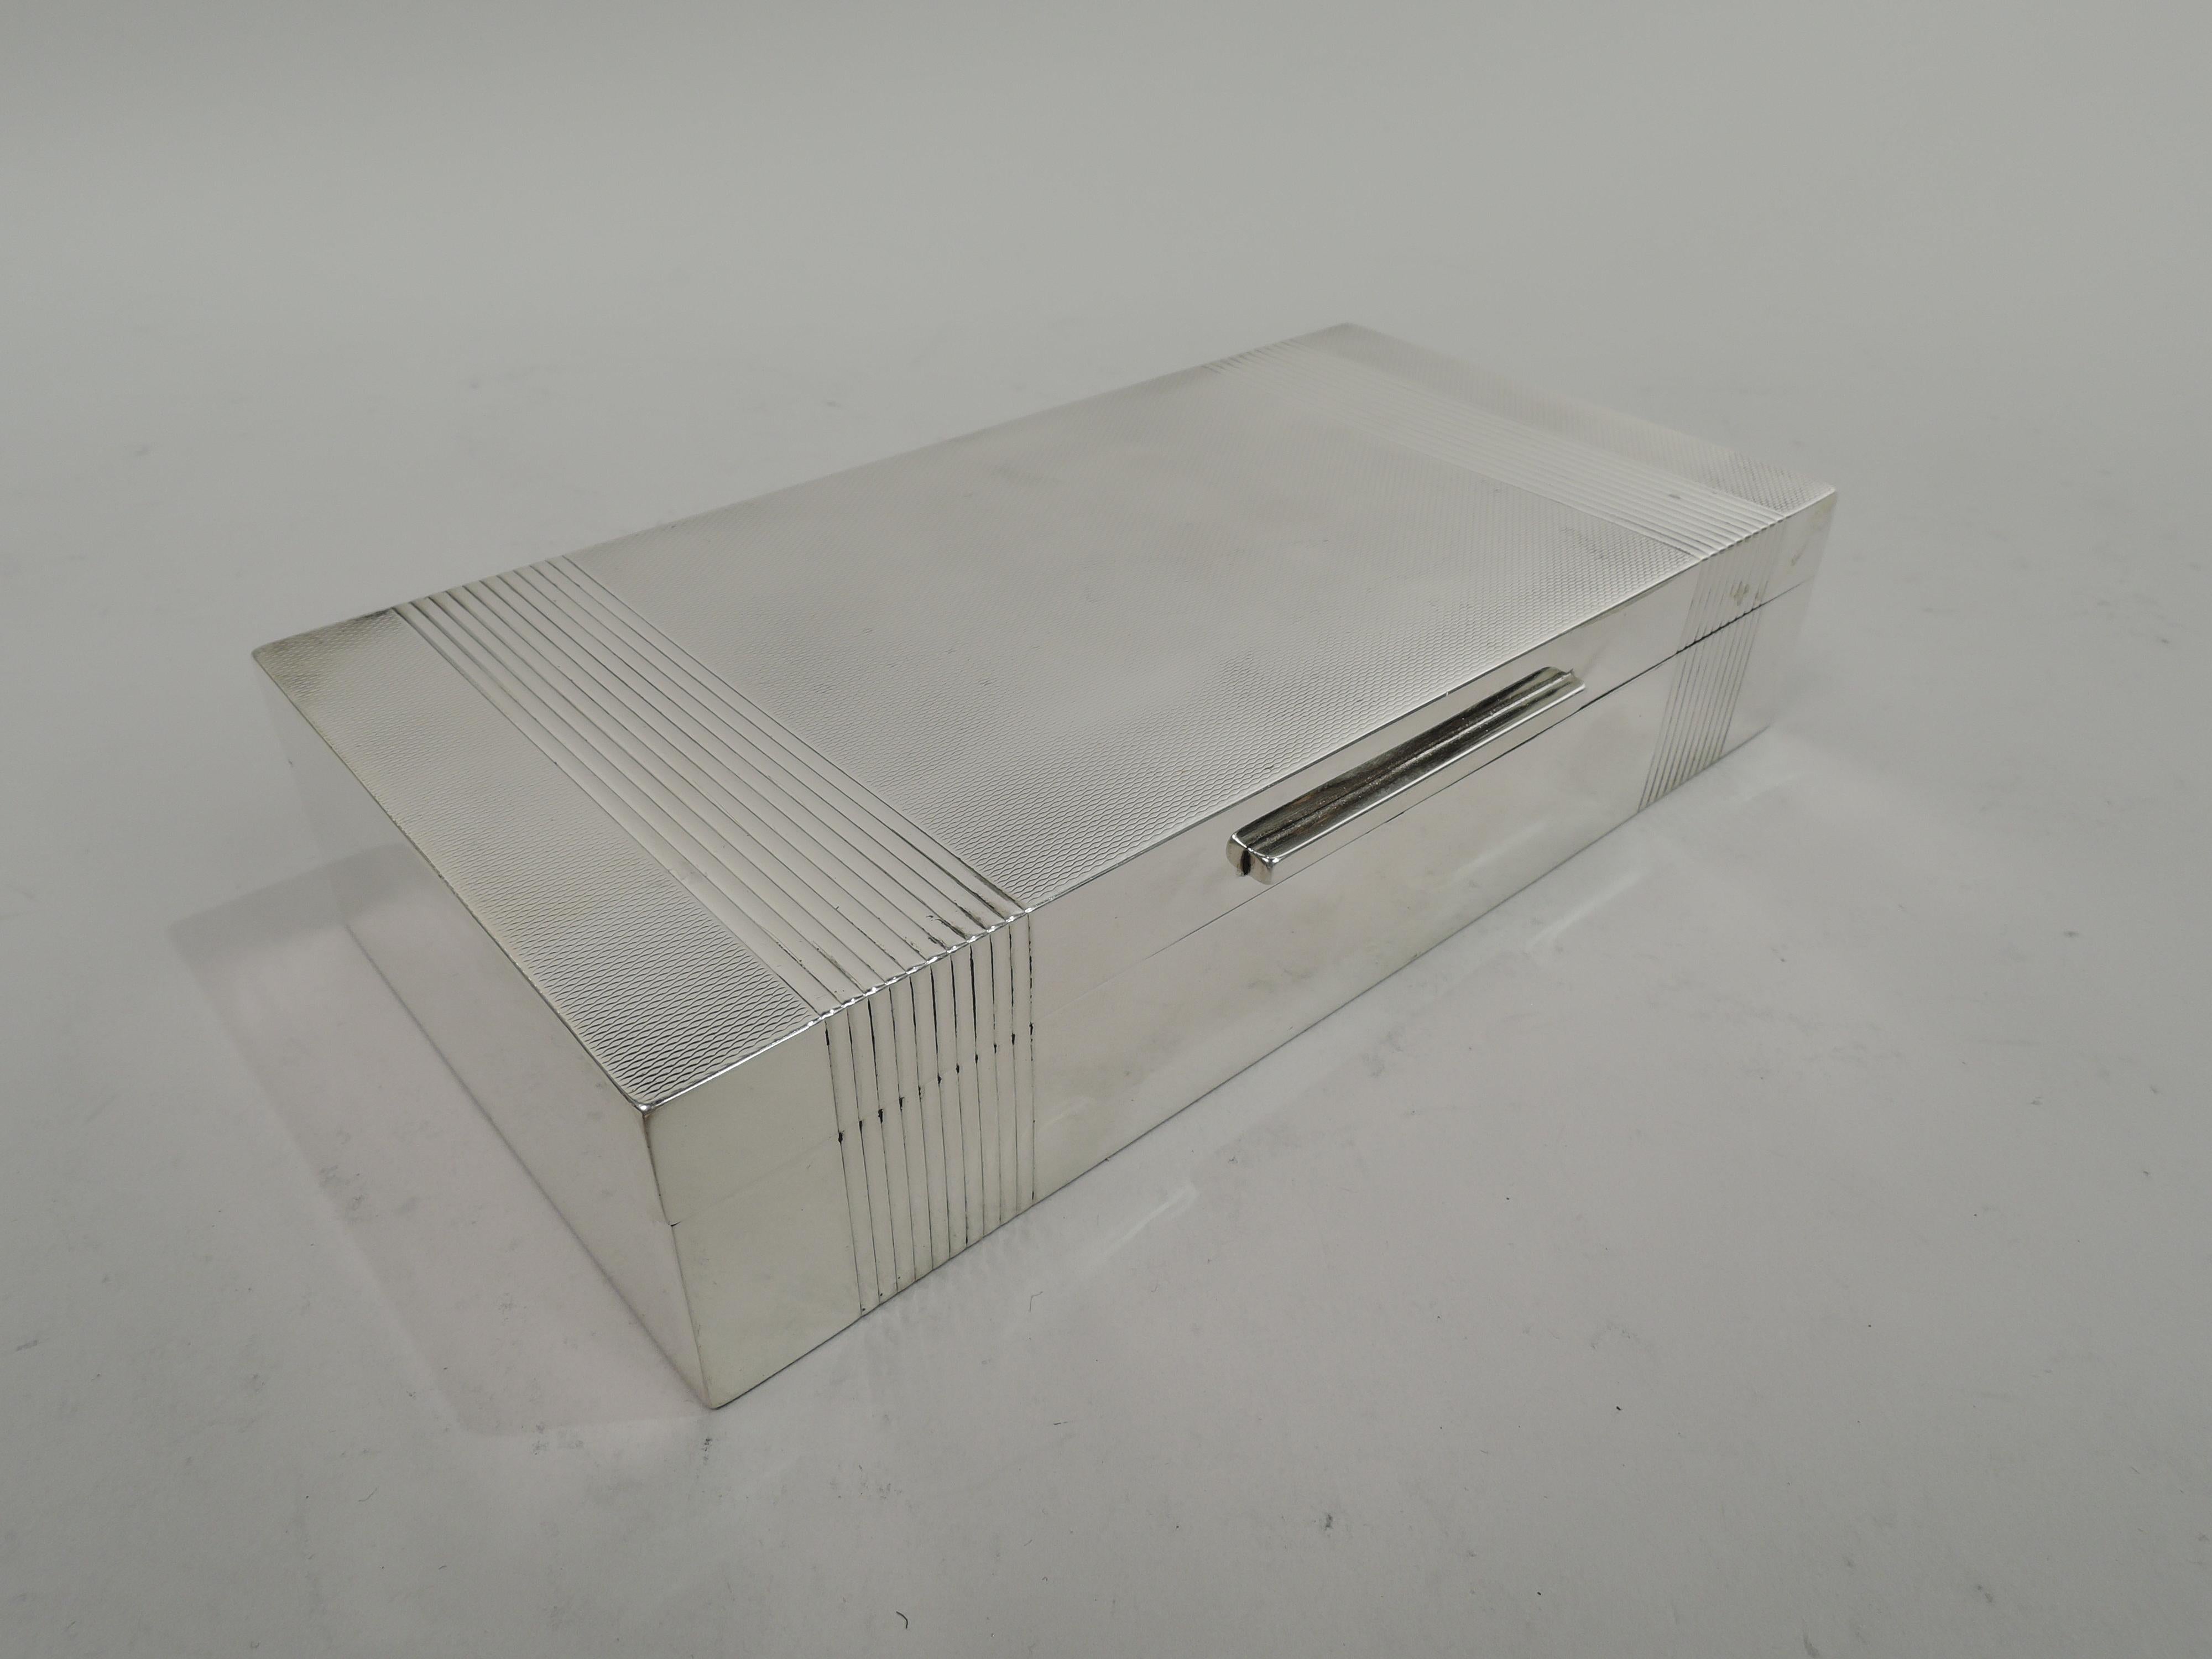 English Art Deco sterling silver box, 1950. Rectangular with straight sides. Cover flat, hinged, and tabbed. Plain sides and engine-turned cover top. Wraparound ribbed bands at ends. Cedar-lined interior. Open felt-lined bottom. Fully marked